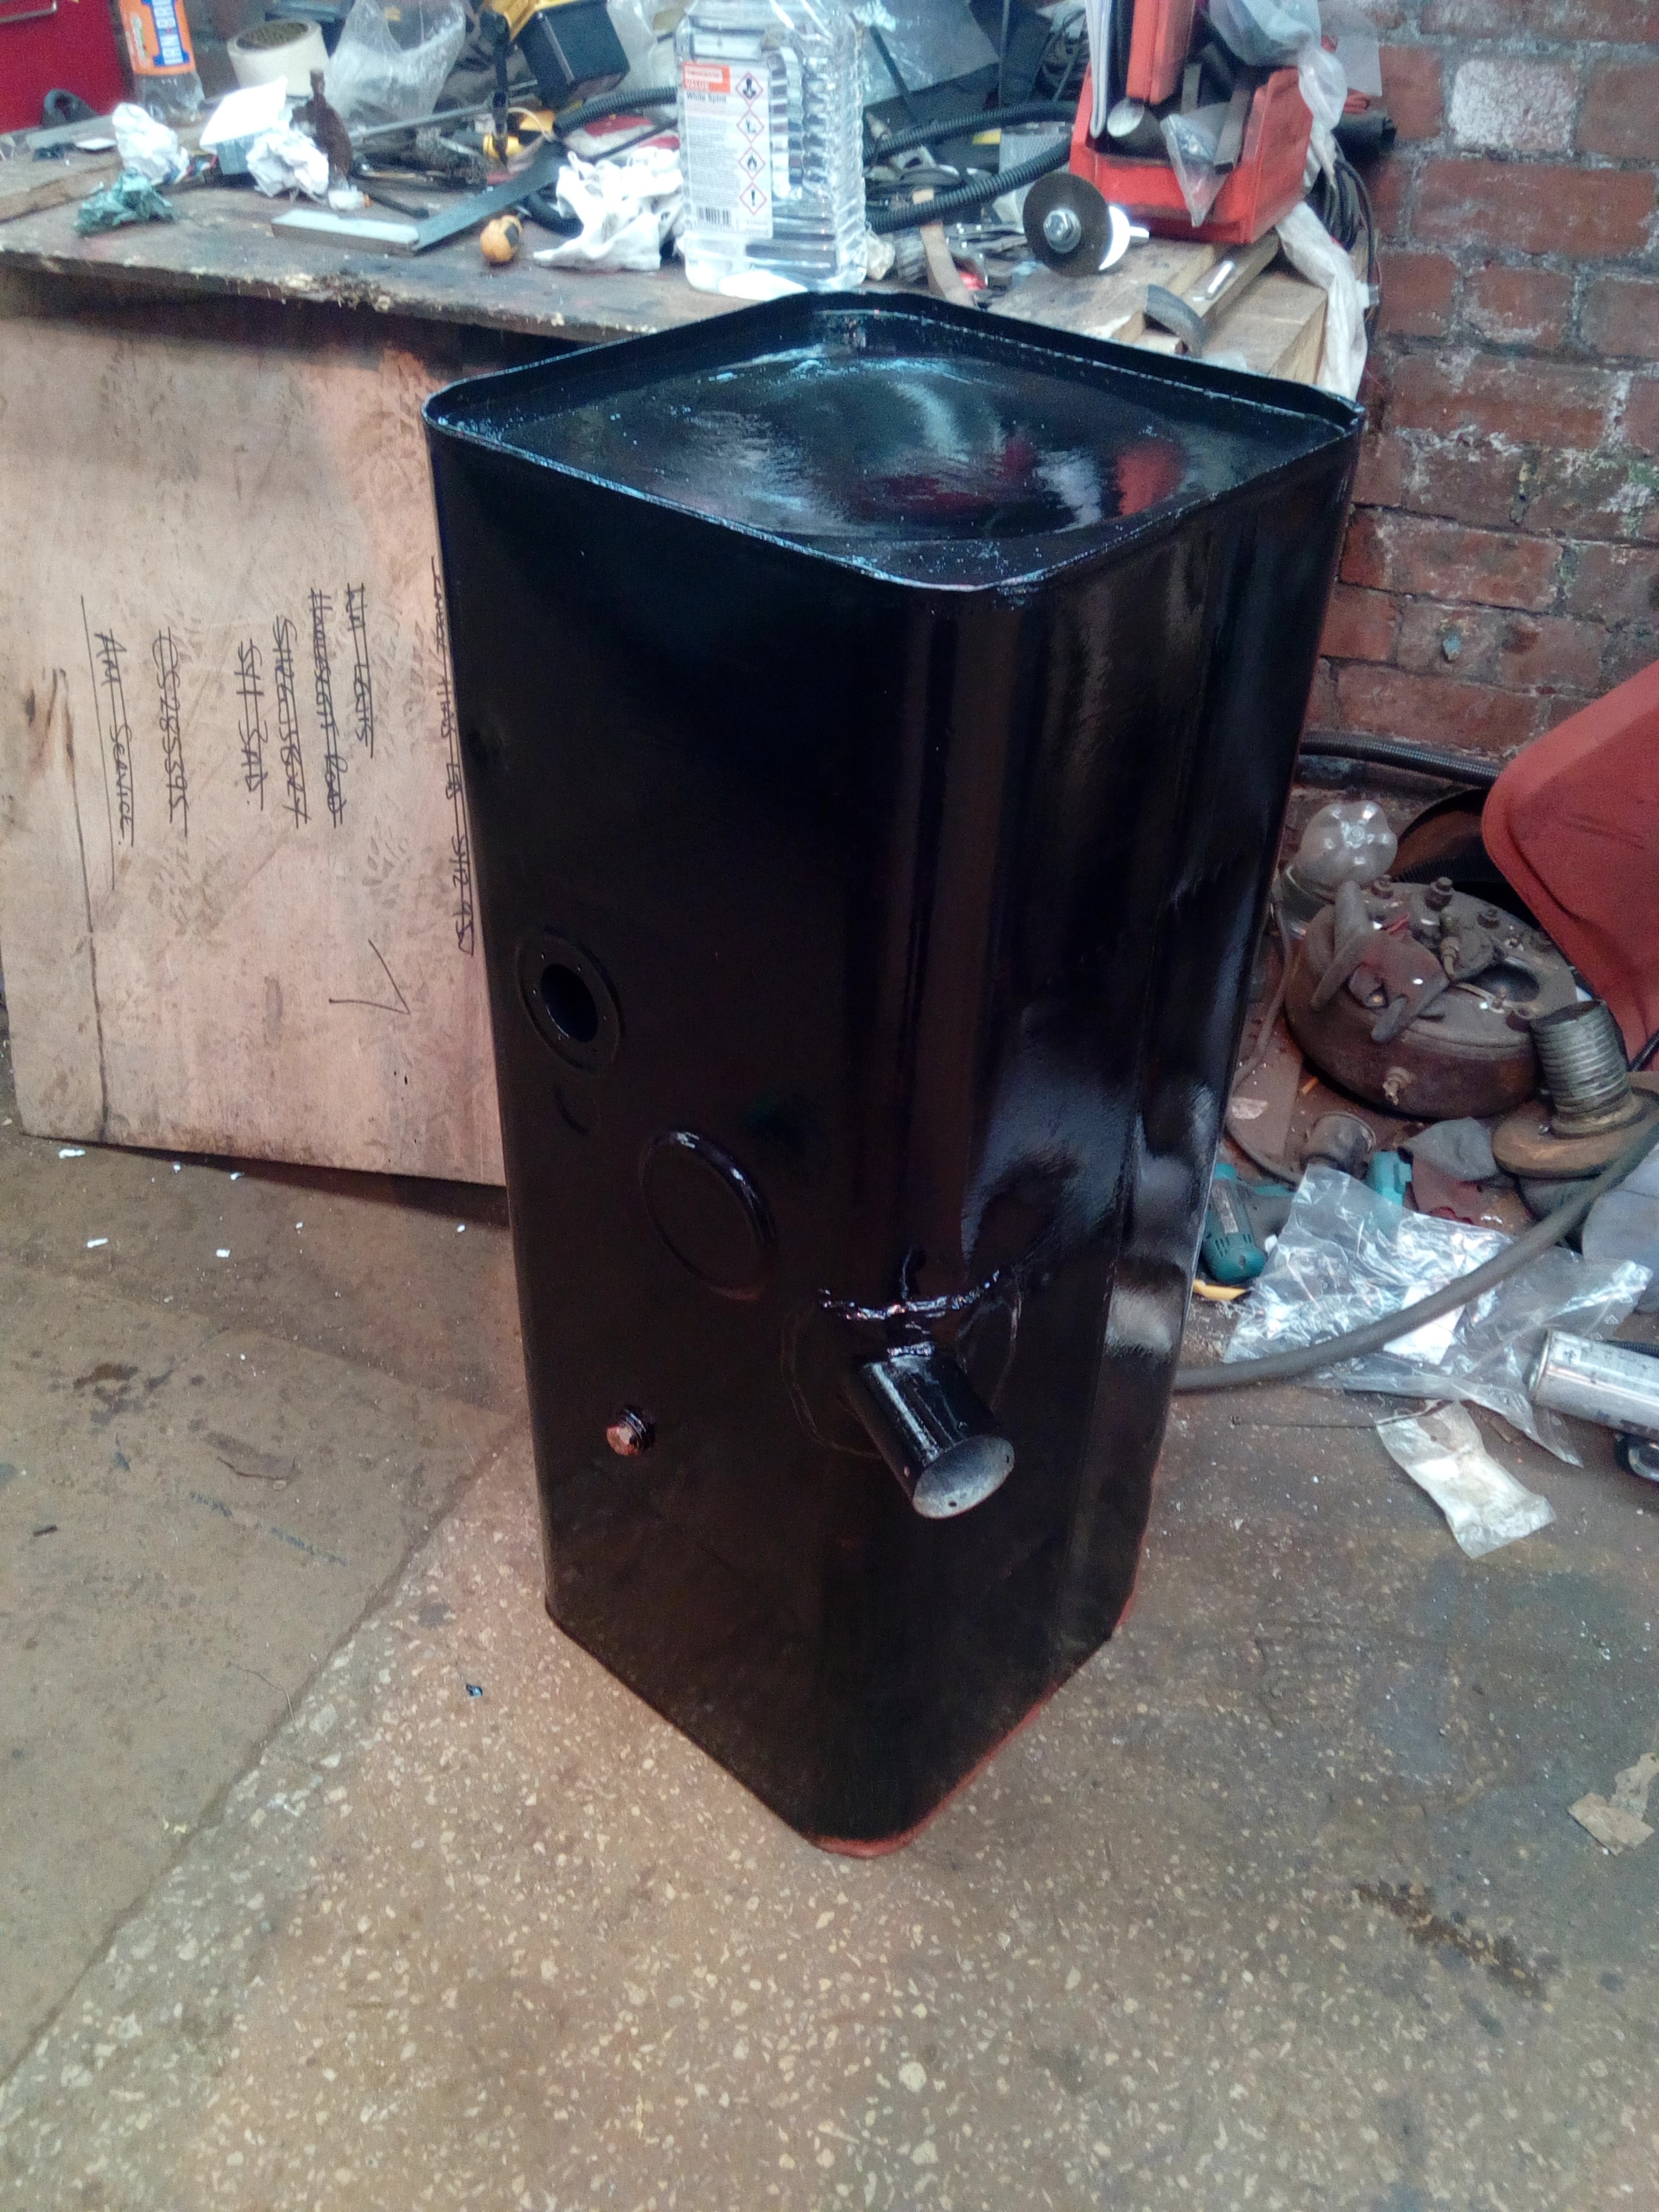 The same fuel tank, now painted in gloss-black paint. It's very shiny, and has visible brush-strokes.